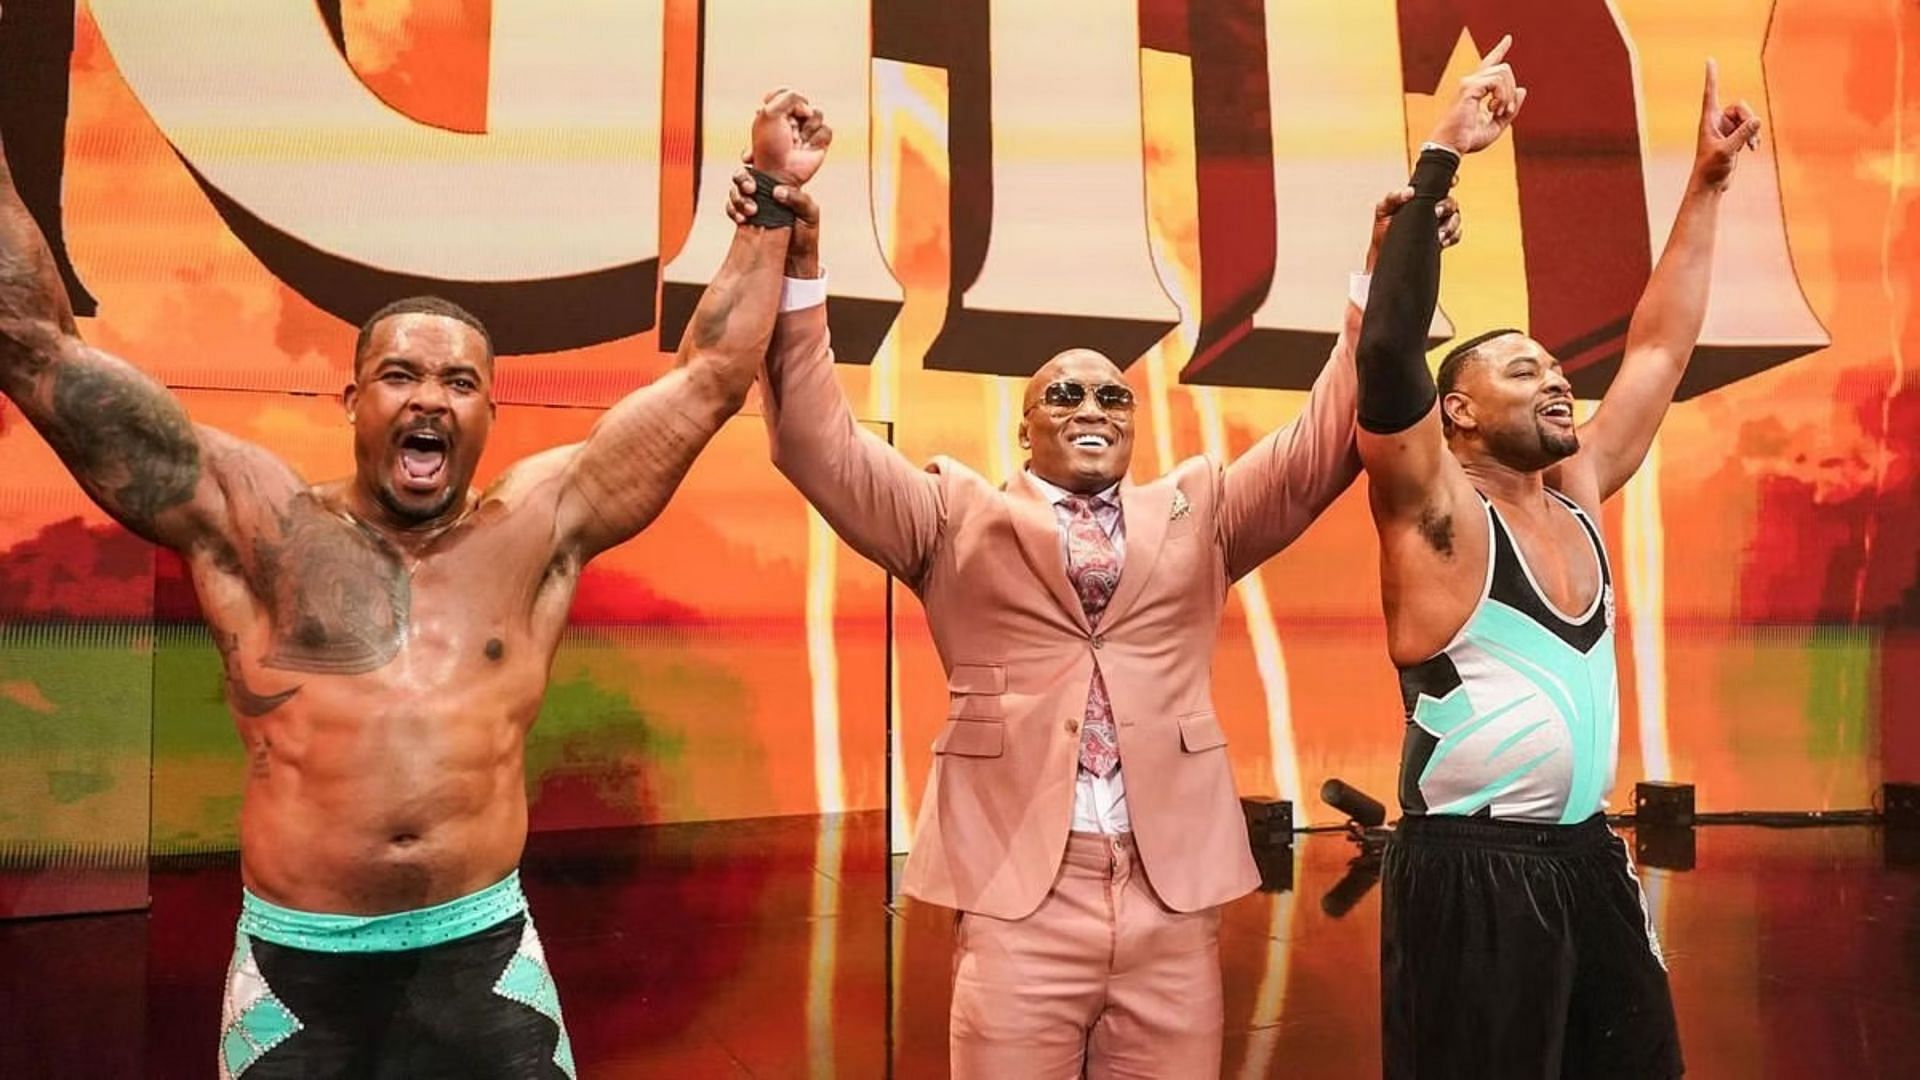 Bobby Lashley and The Street Profits formed a new faction on WWE SmackDown